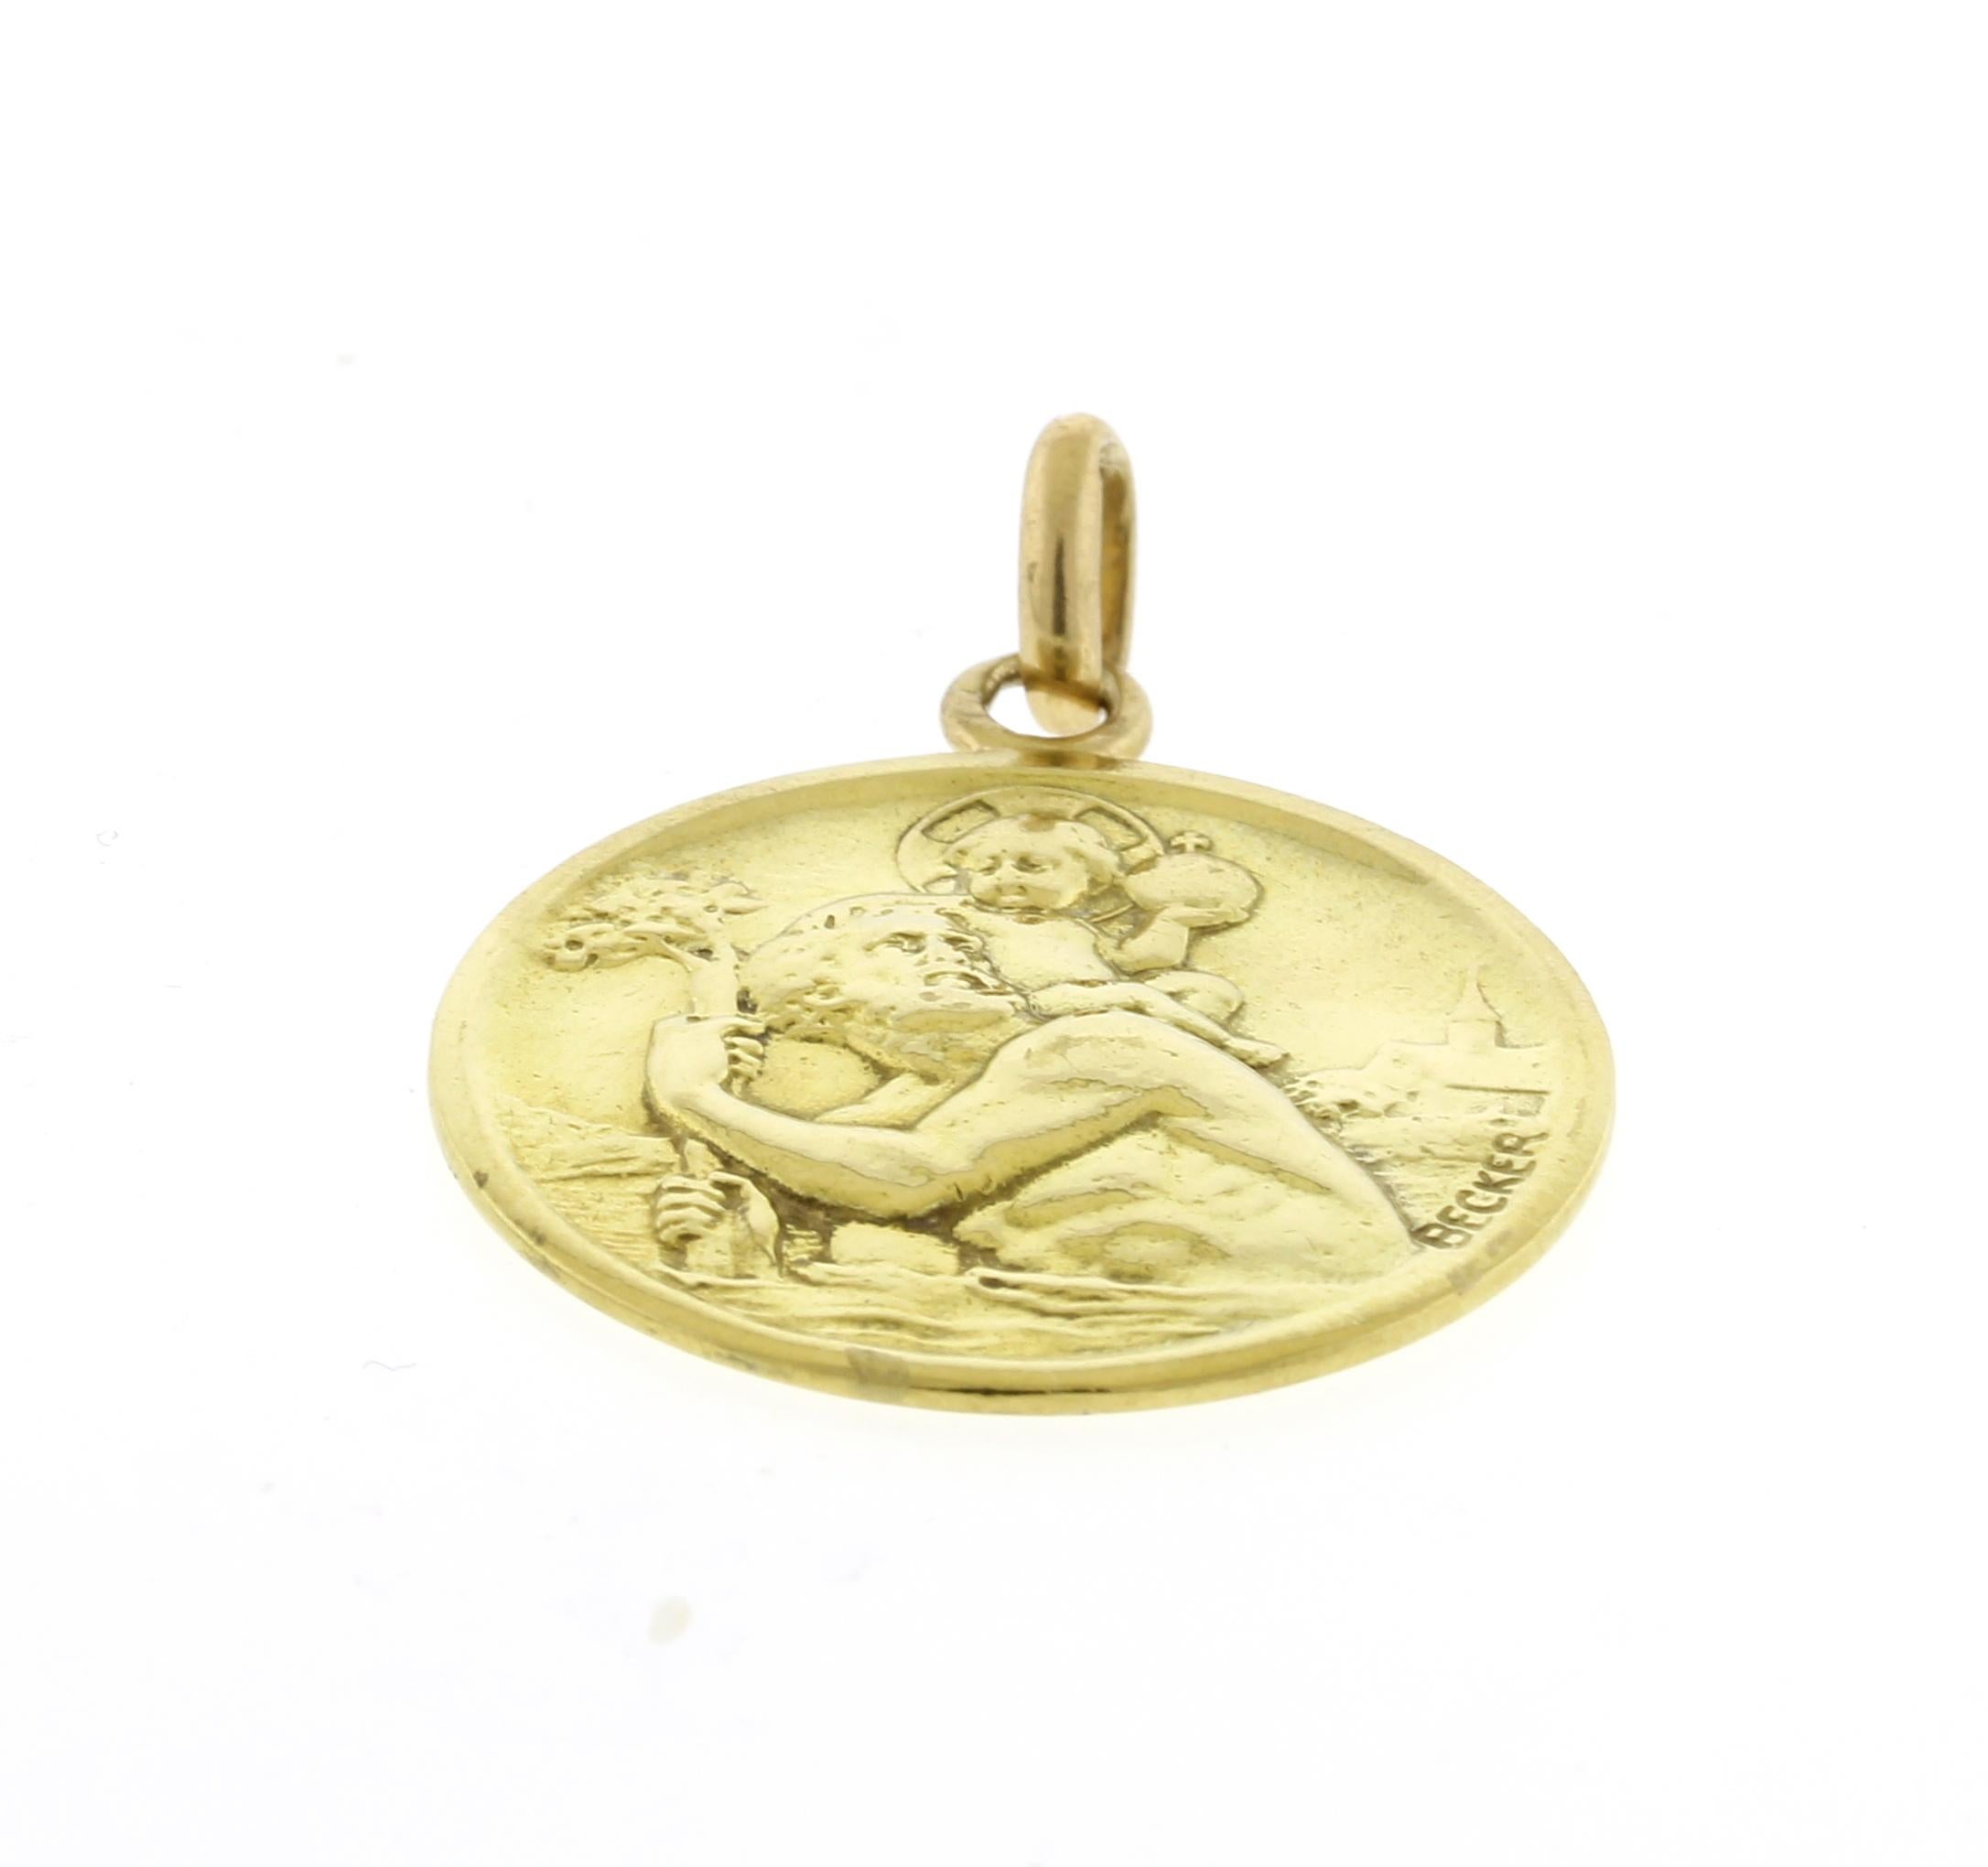 This 18kt gold pendant shows St. Christopher crossing the water with Jesus on his shoulder.  The jeweler was Edmond-Henri Becker, he was born in France in 1871.
• Designer: Edmond Henri Becker
• Metal: 18kt Yellow Gold
• Circa: 1950s
• Diameter: